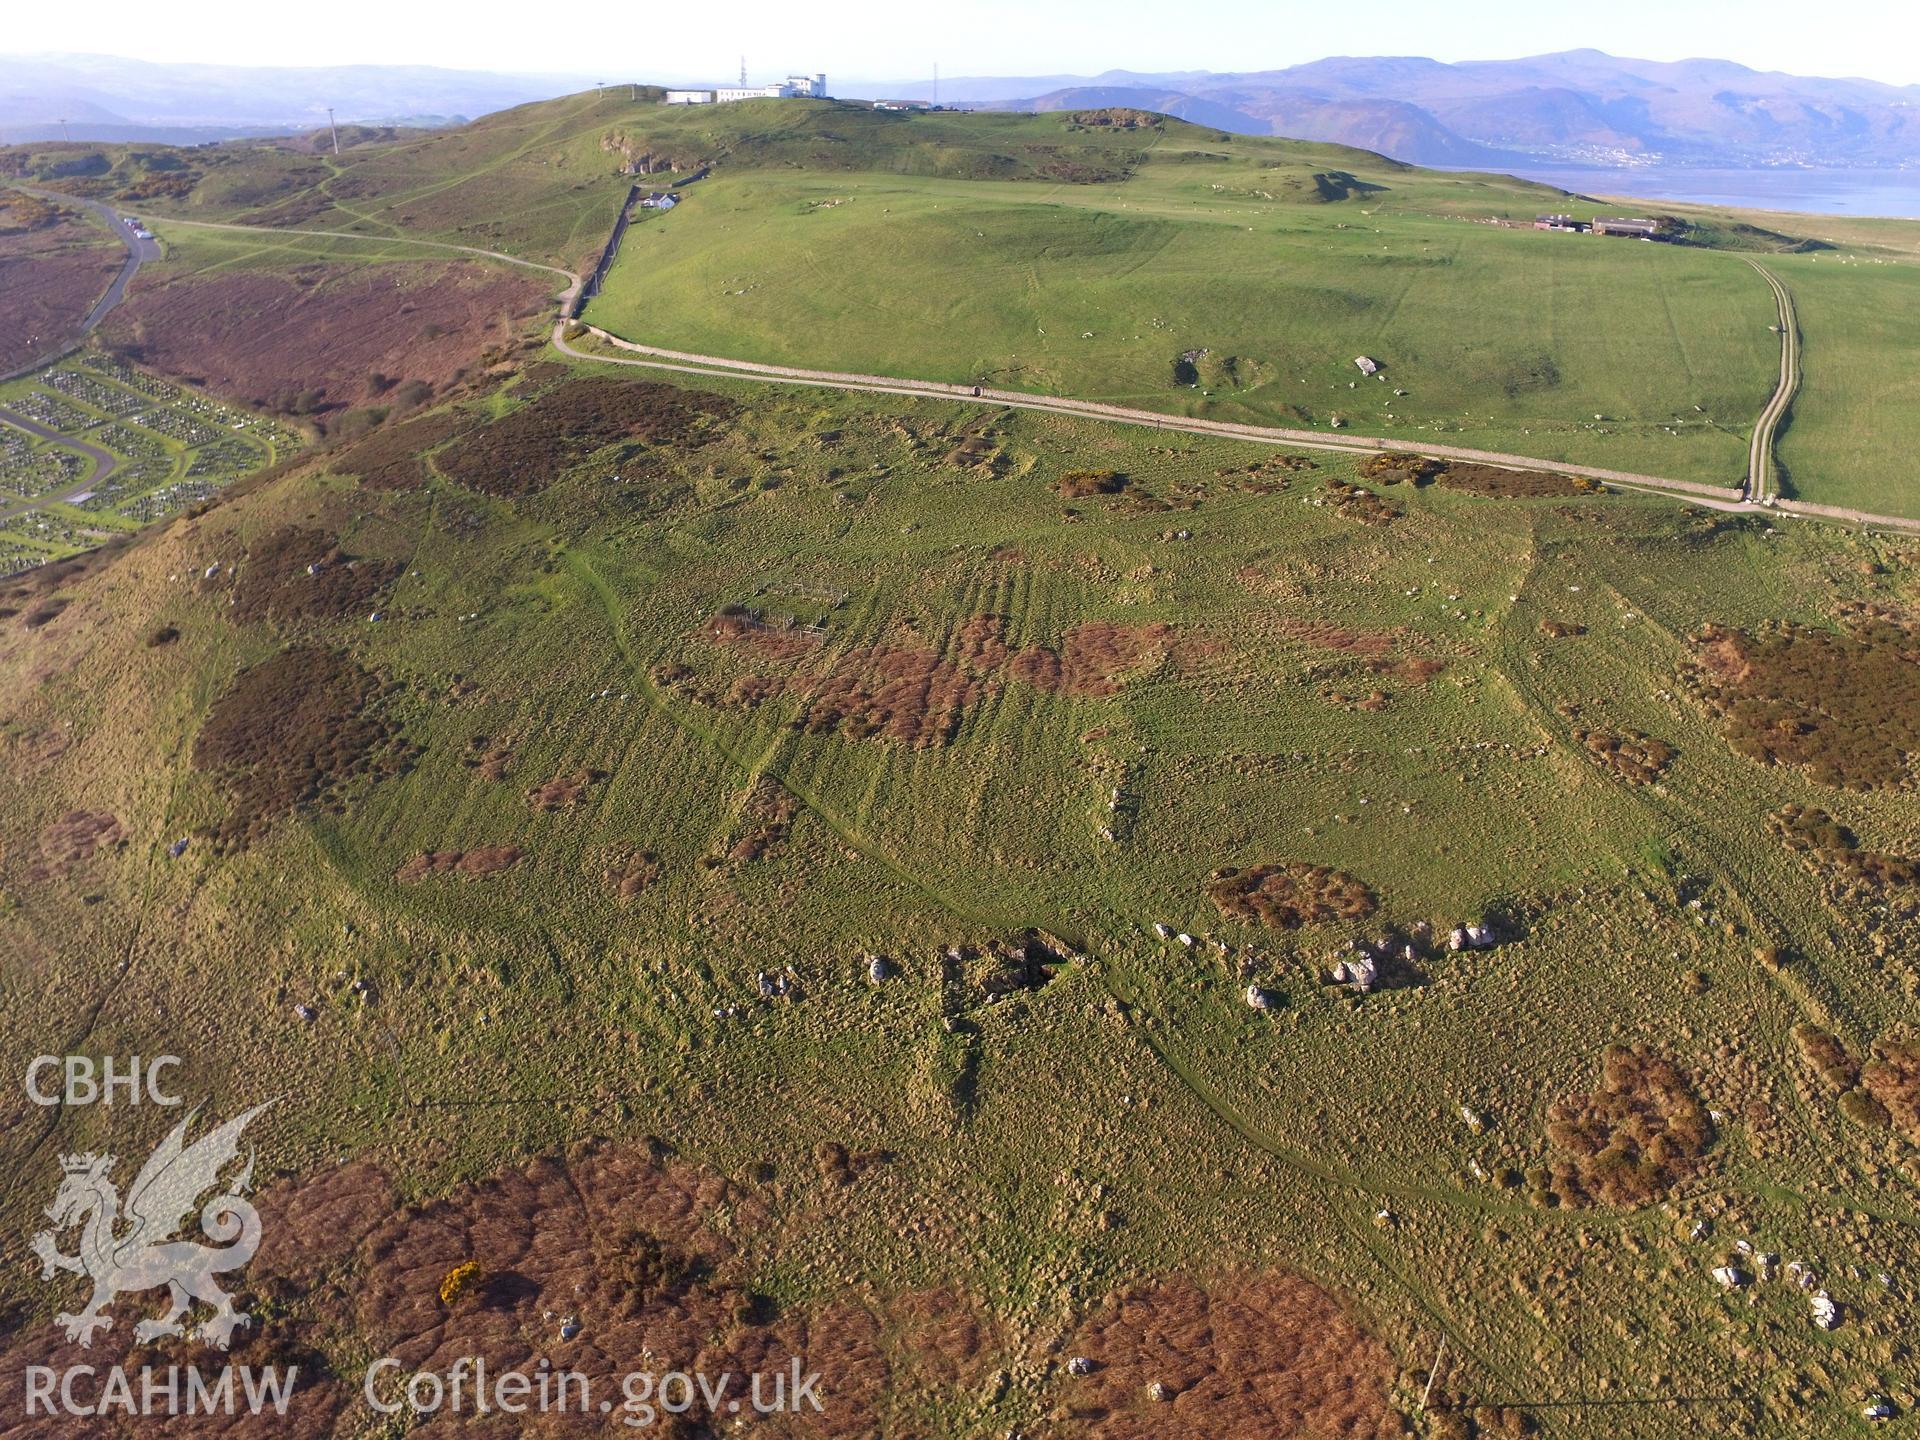 Colour photo showing aerial view of Hwylfa'r Ceirw deserted rural settlement on the Great Orme, Llandudno, taken by Paul R. Davis, 19th April 2018.